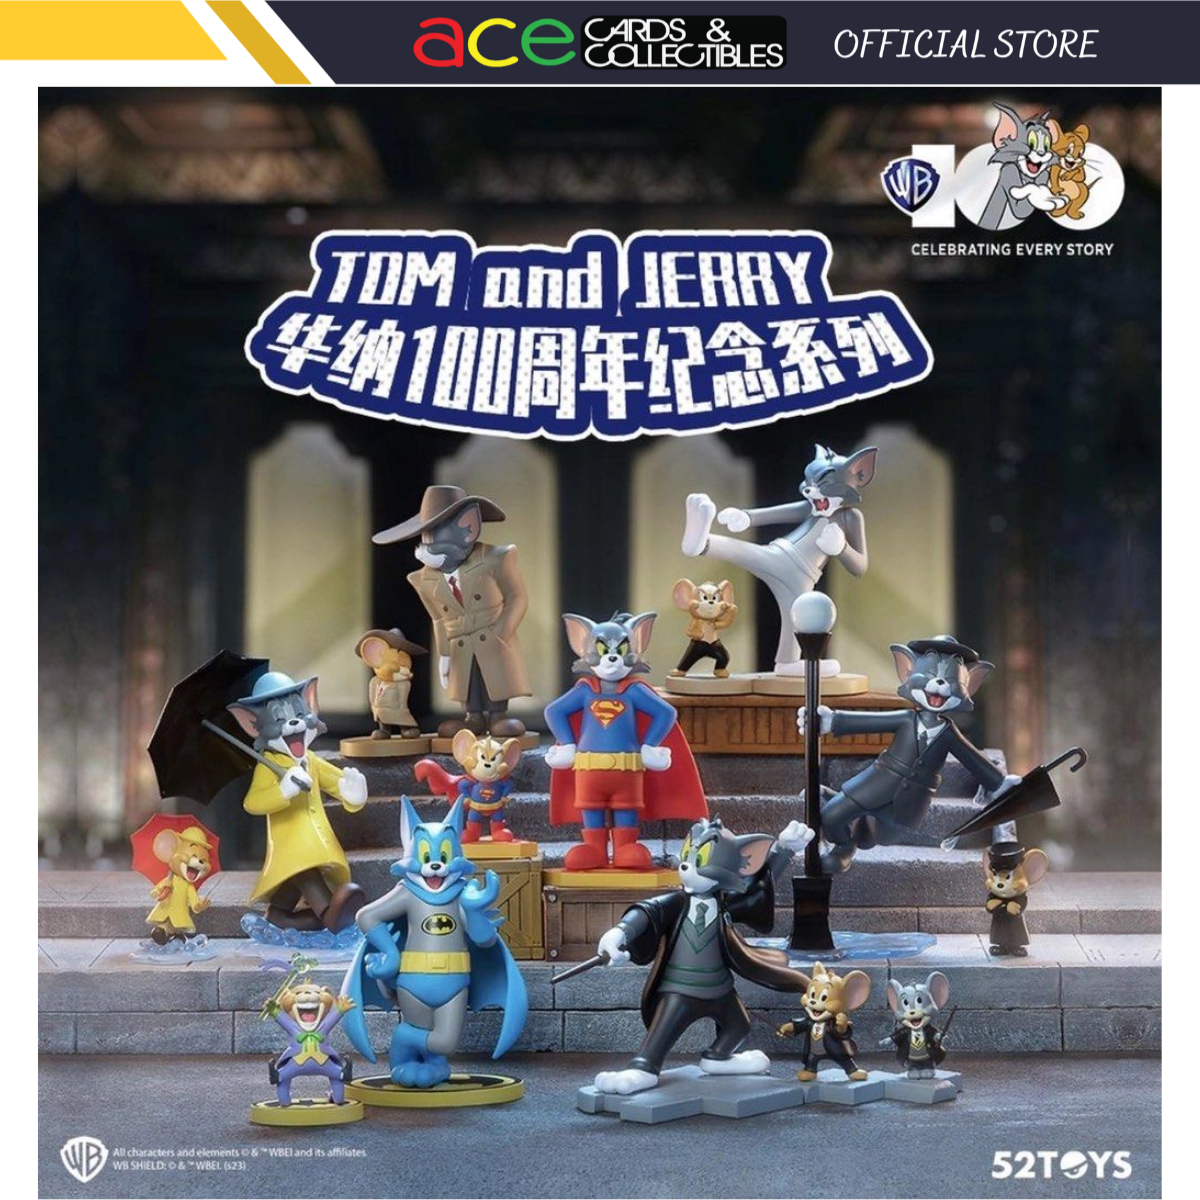 52Toys x Tom And Jerry Warner 100th Anniversary Commemorative Series-Single Box (Random)-52Toys-Ace Cards & Collectibles